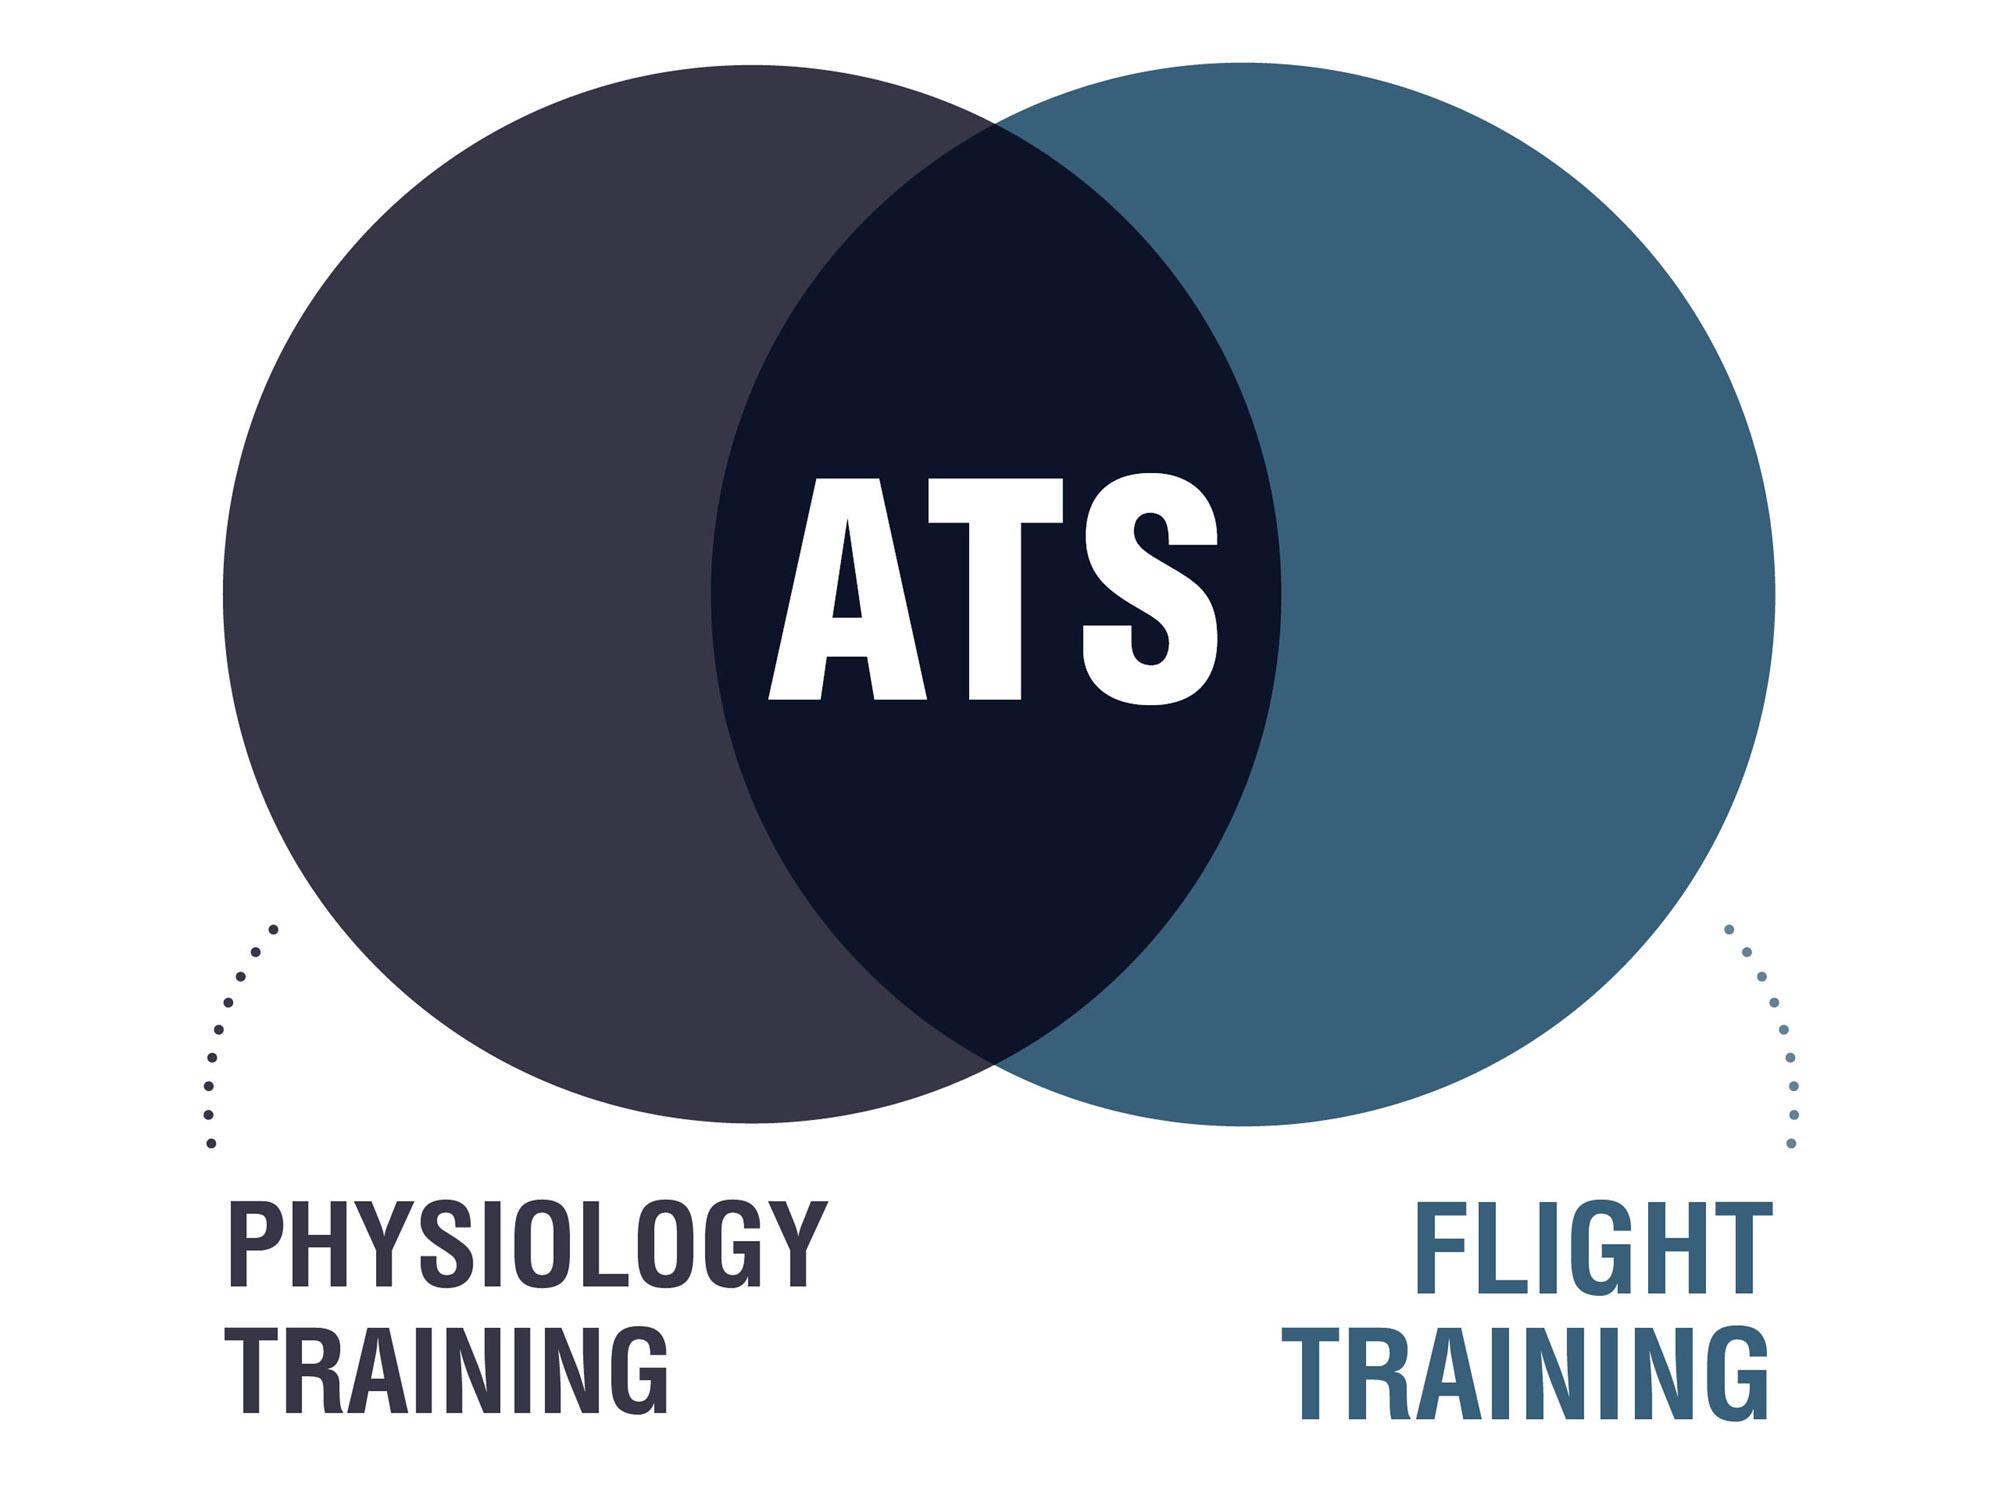 Physiology and Flight Training